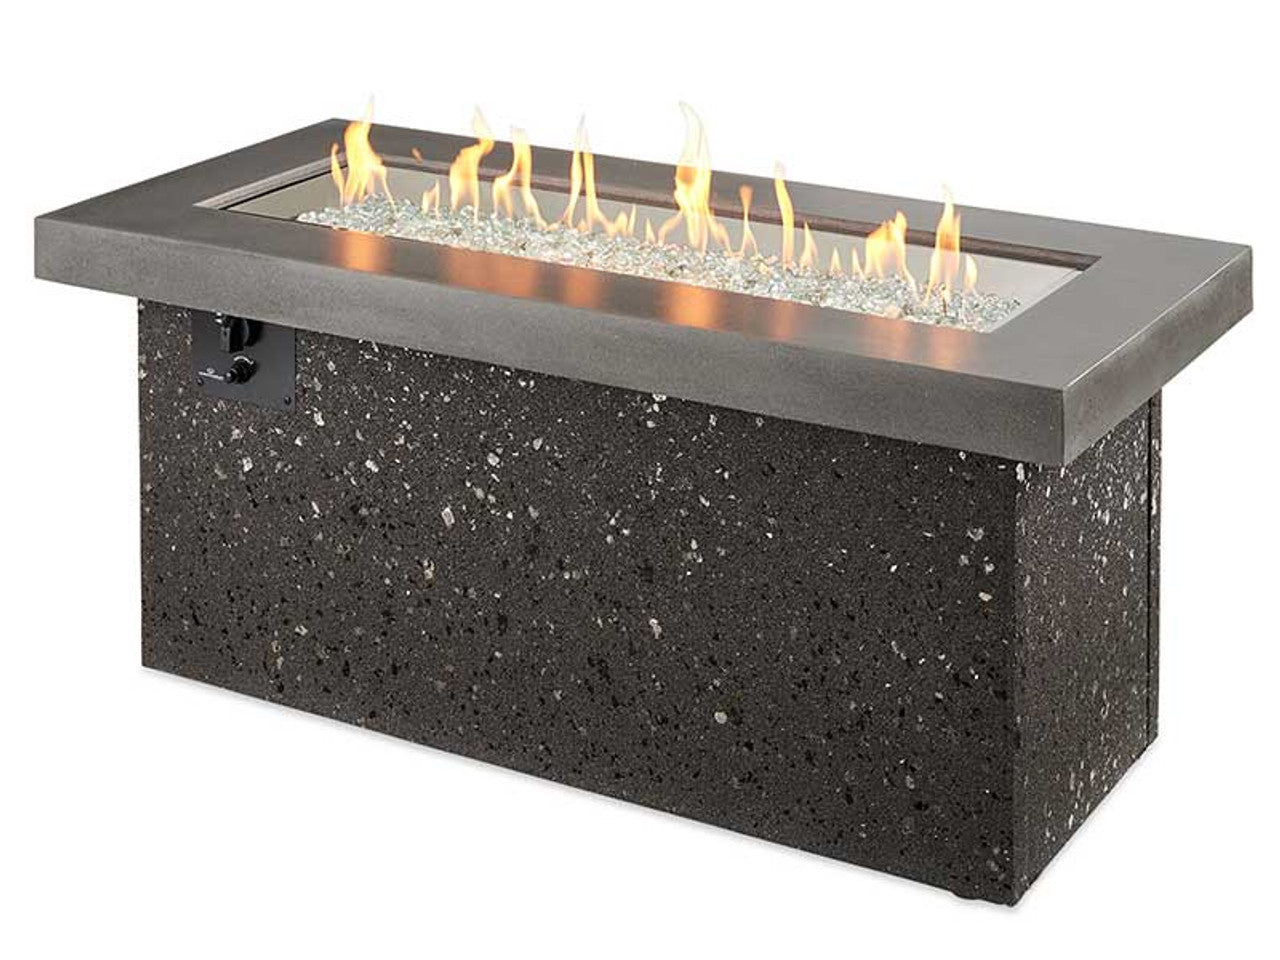 Outdoor Greatroom - Stainless Steel Key Largo Linear Gas Fire Pit Table w/Direct Spark Ignition (NG) - KL1242SDSING